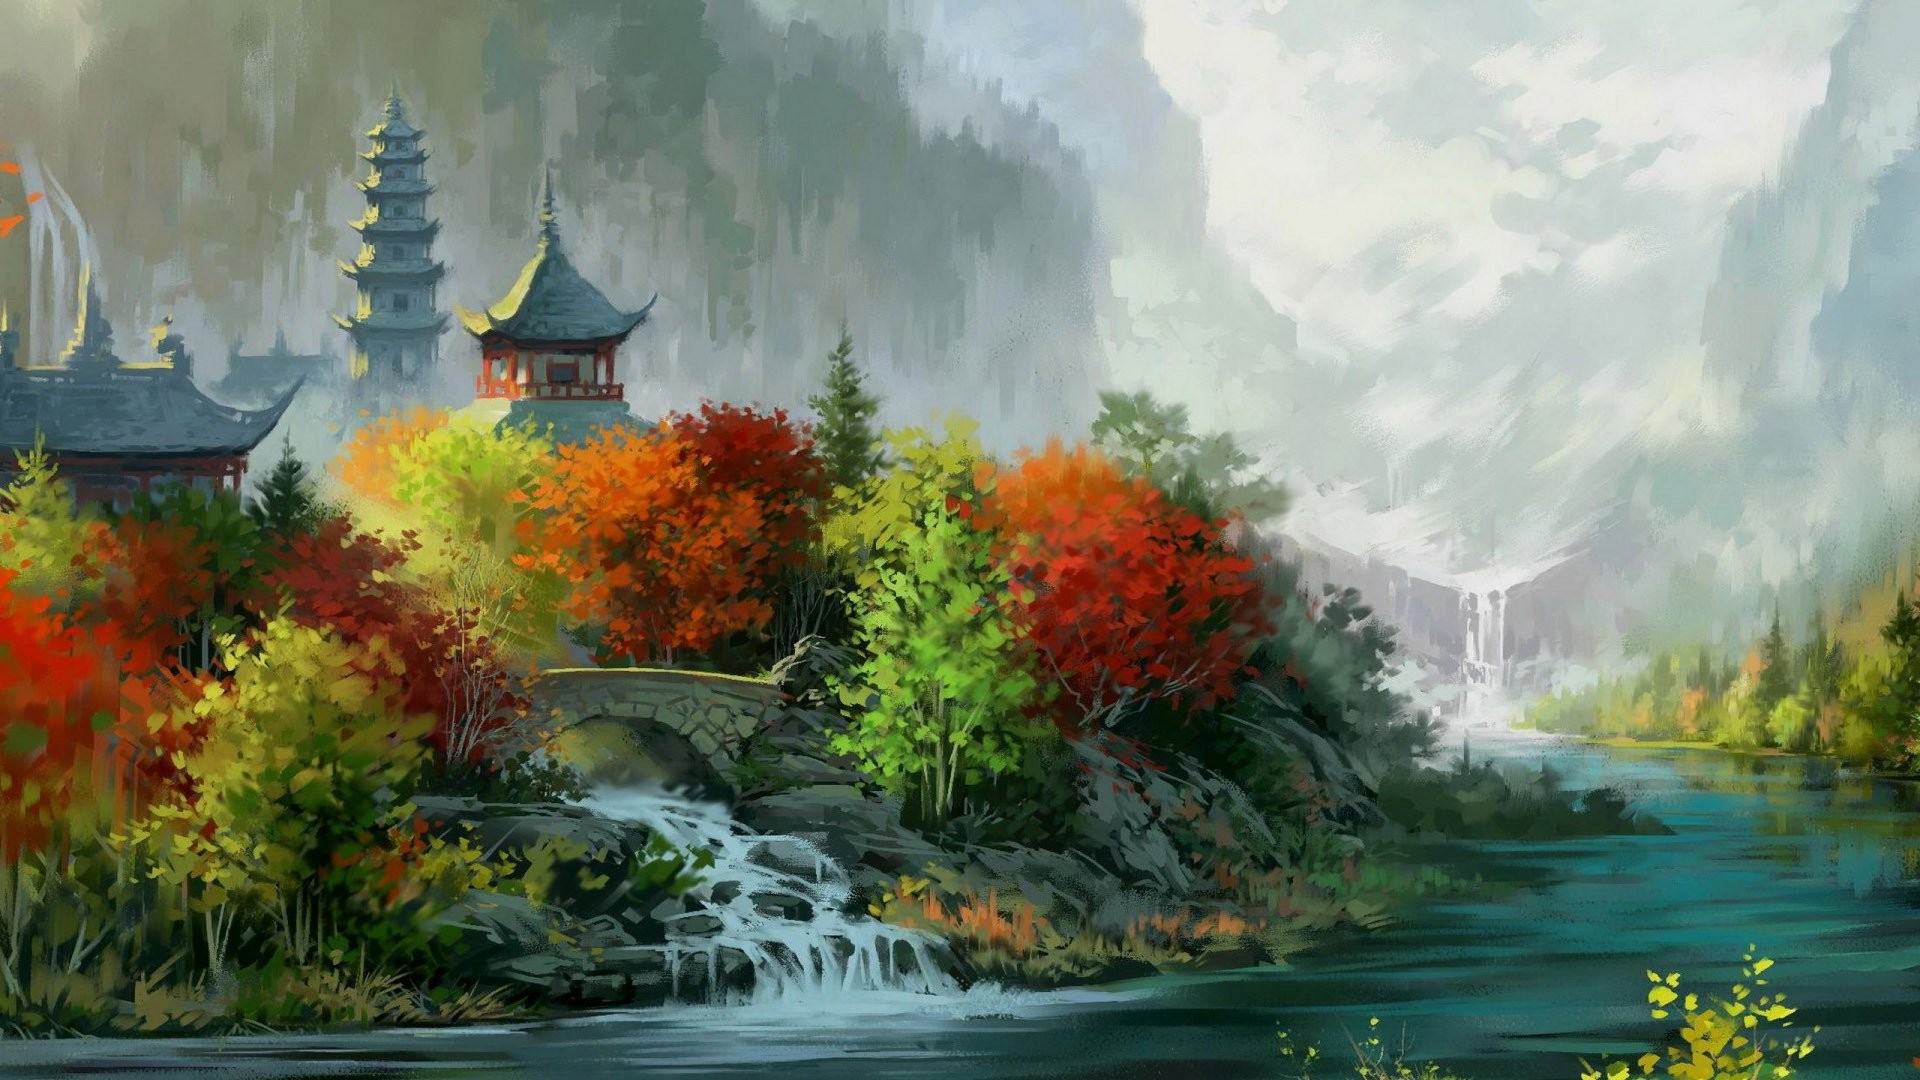 artwork, Painting, Digital Art, Asian Architecture, House, Tower, Nature, Landscape, River, Bridge, Waterfall, Trees, Forest, Valley, Mountain, Fall, Leaves Wallpaper